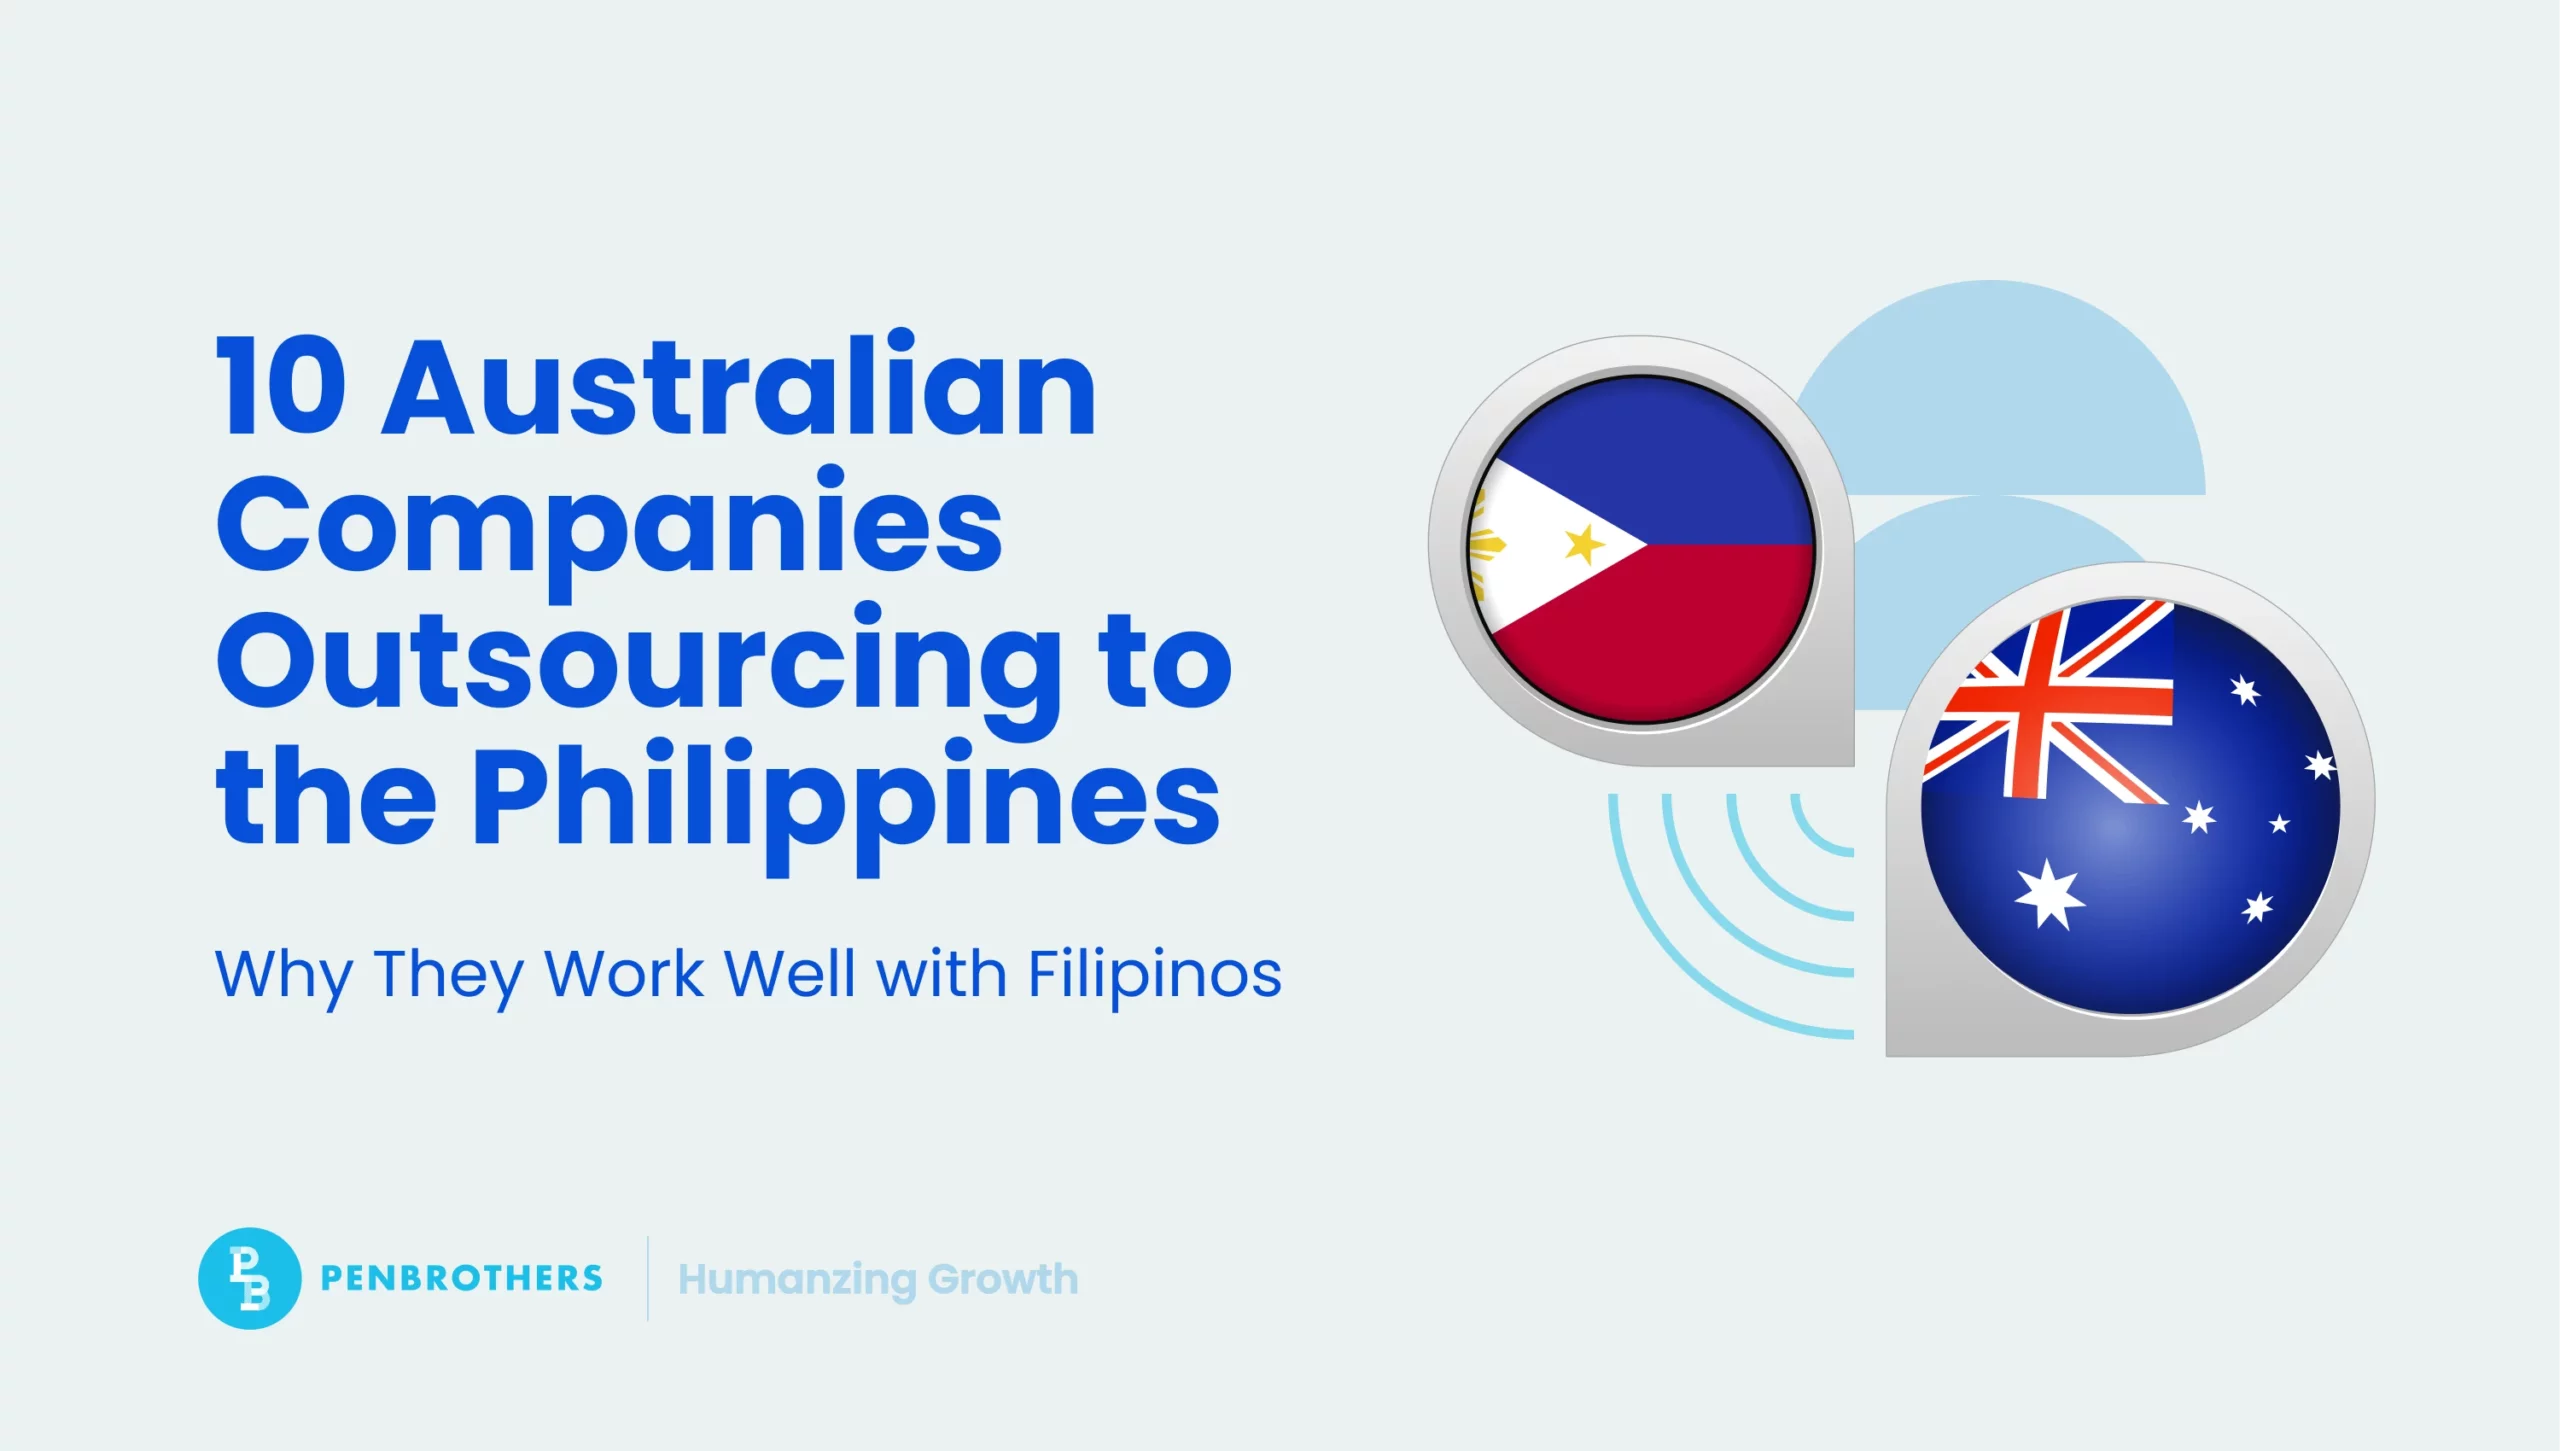 Why These Top 10 Australian Companies Outsource to the Philippines